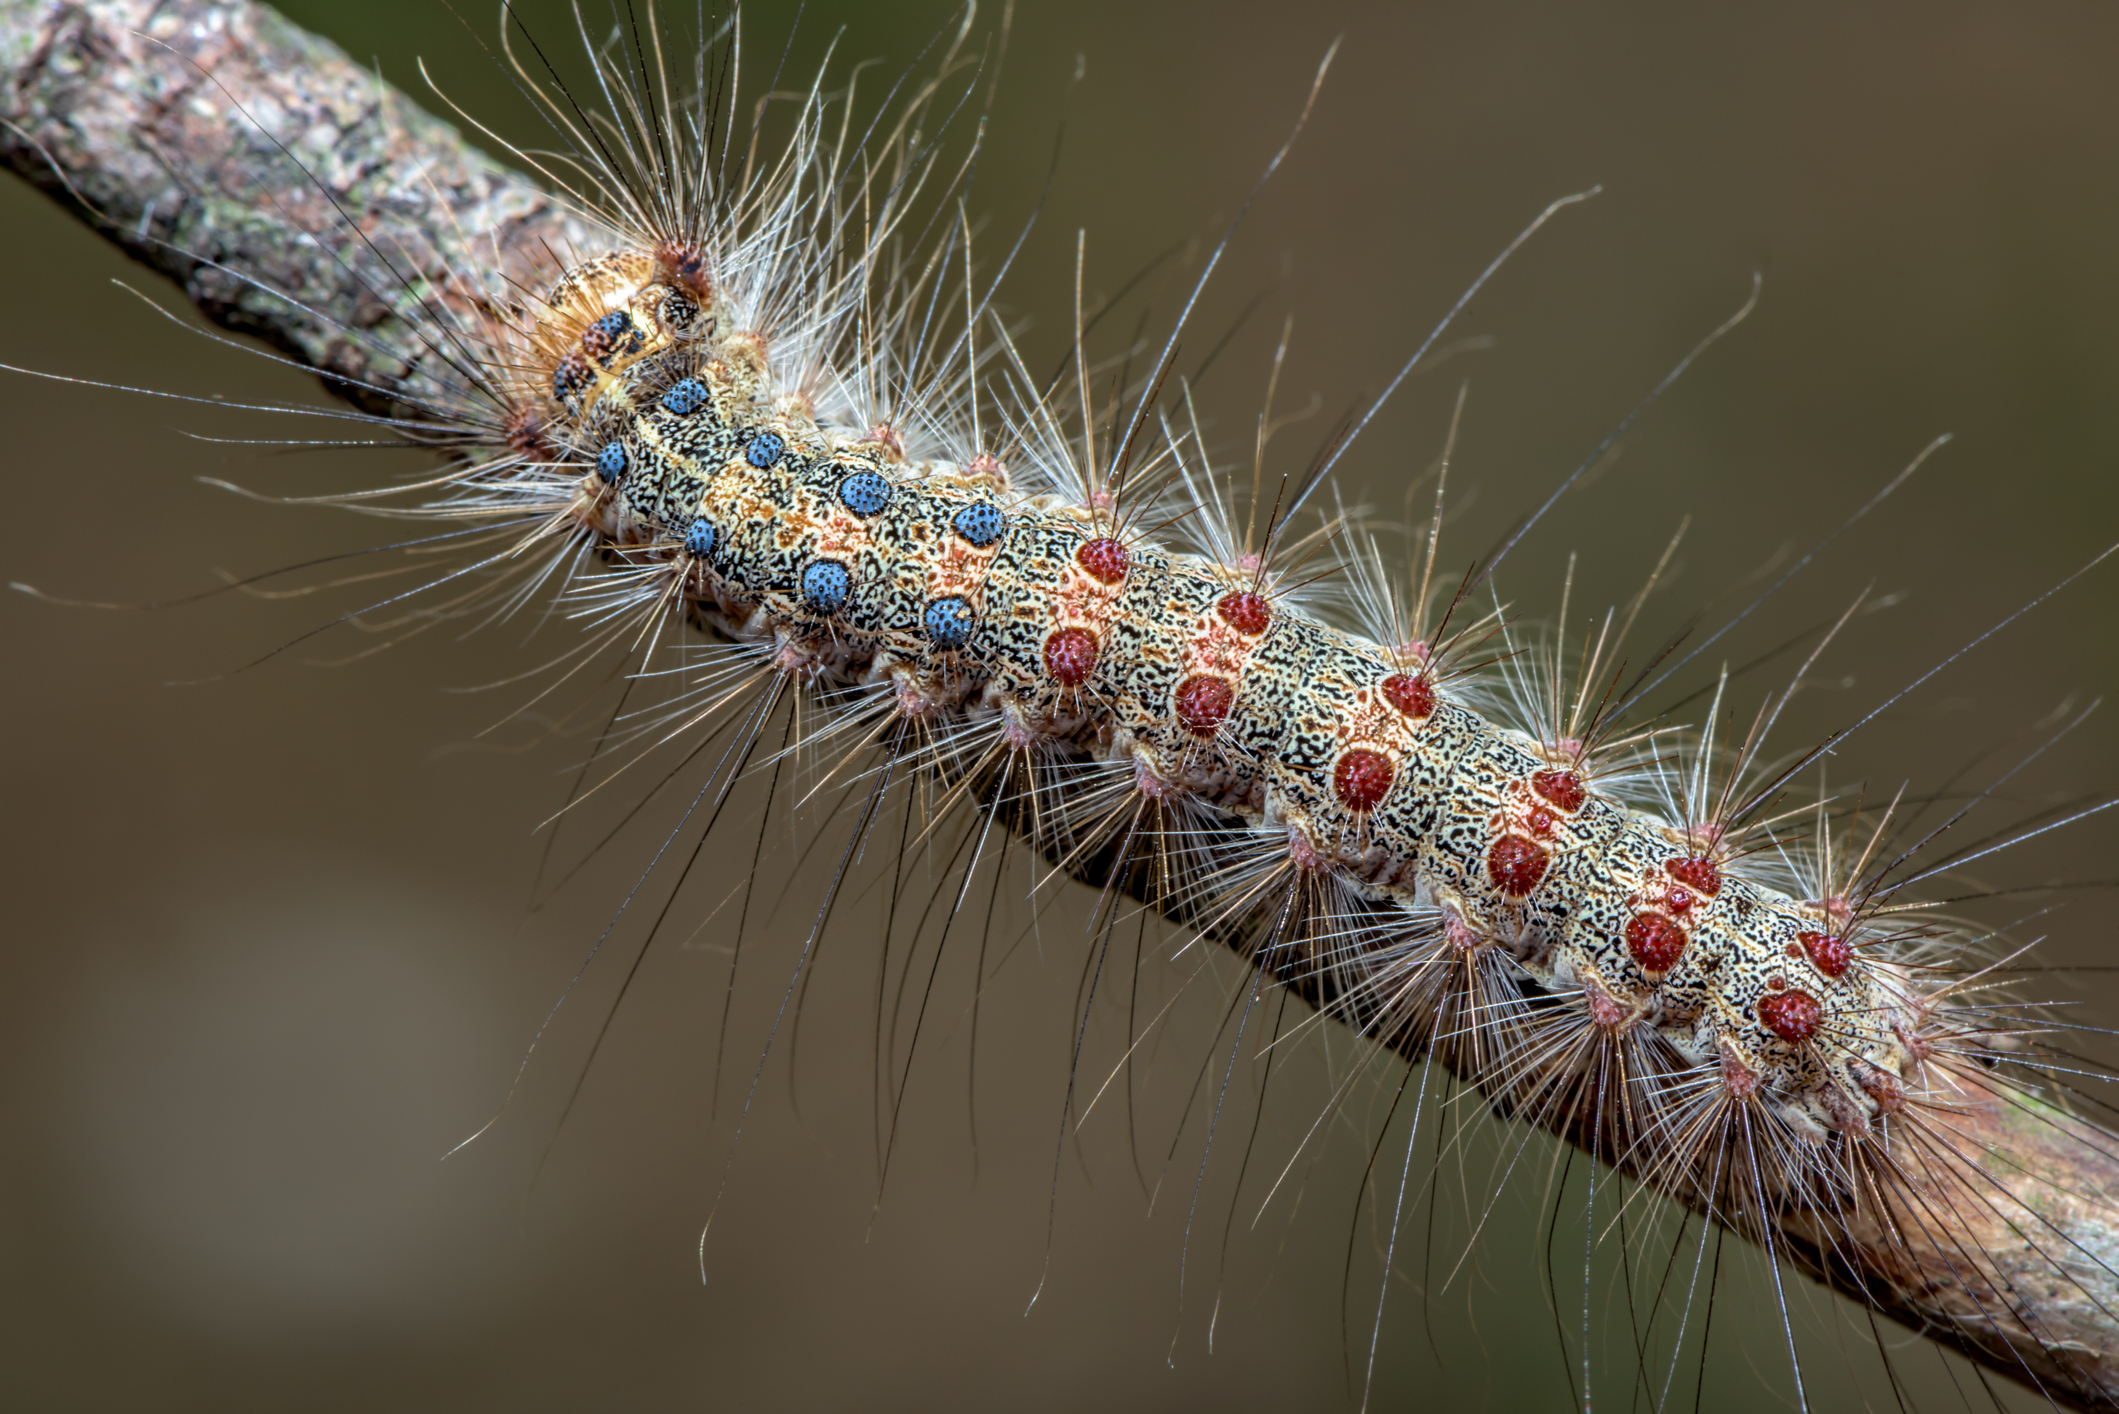 Image of Gypsy moth with blue and red dots